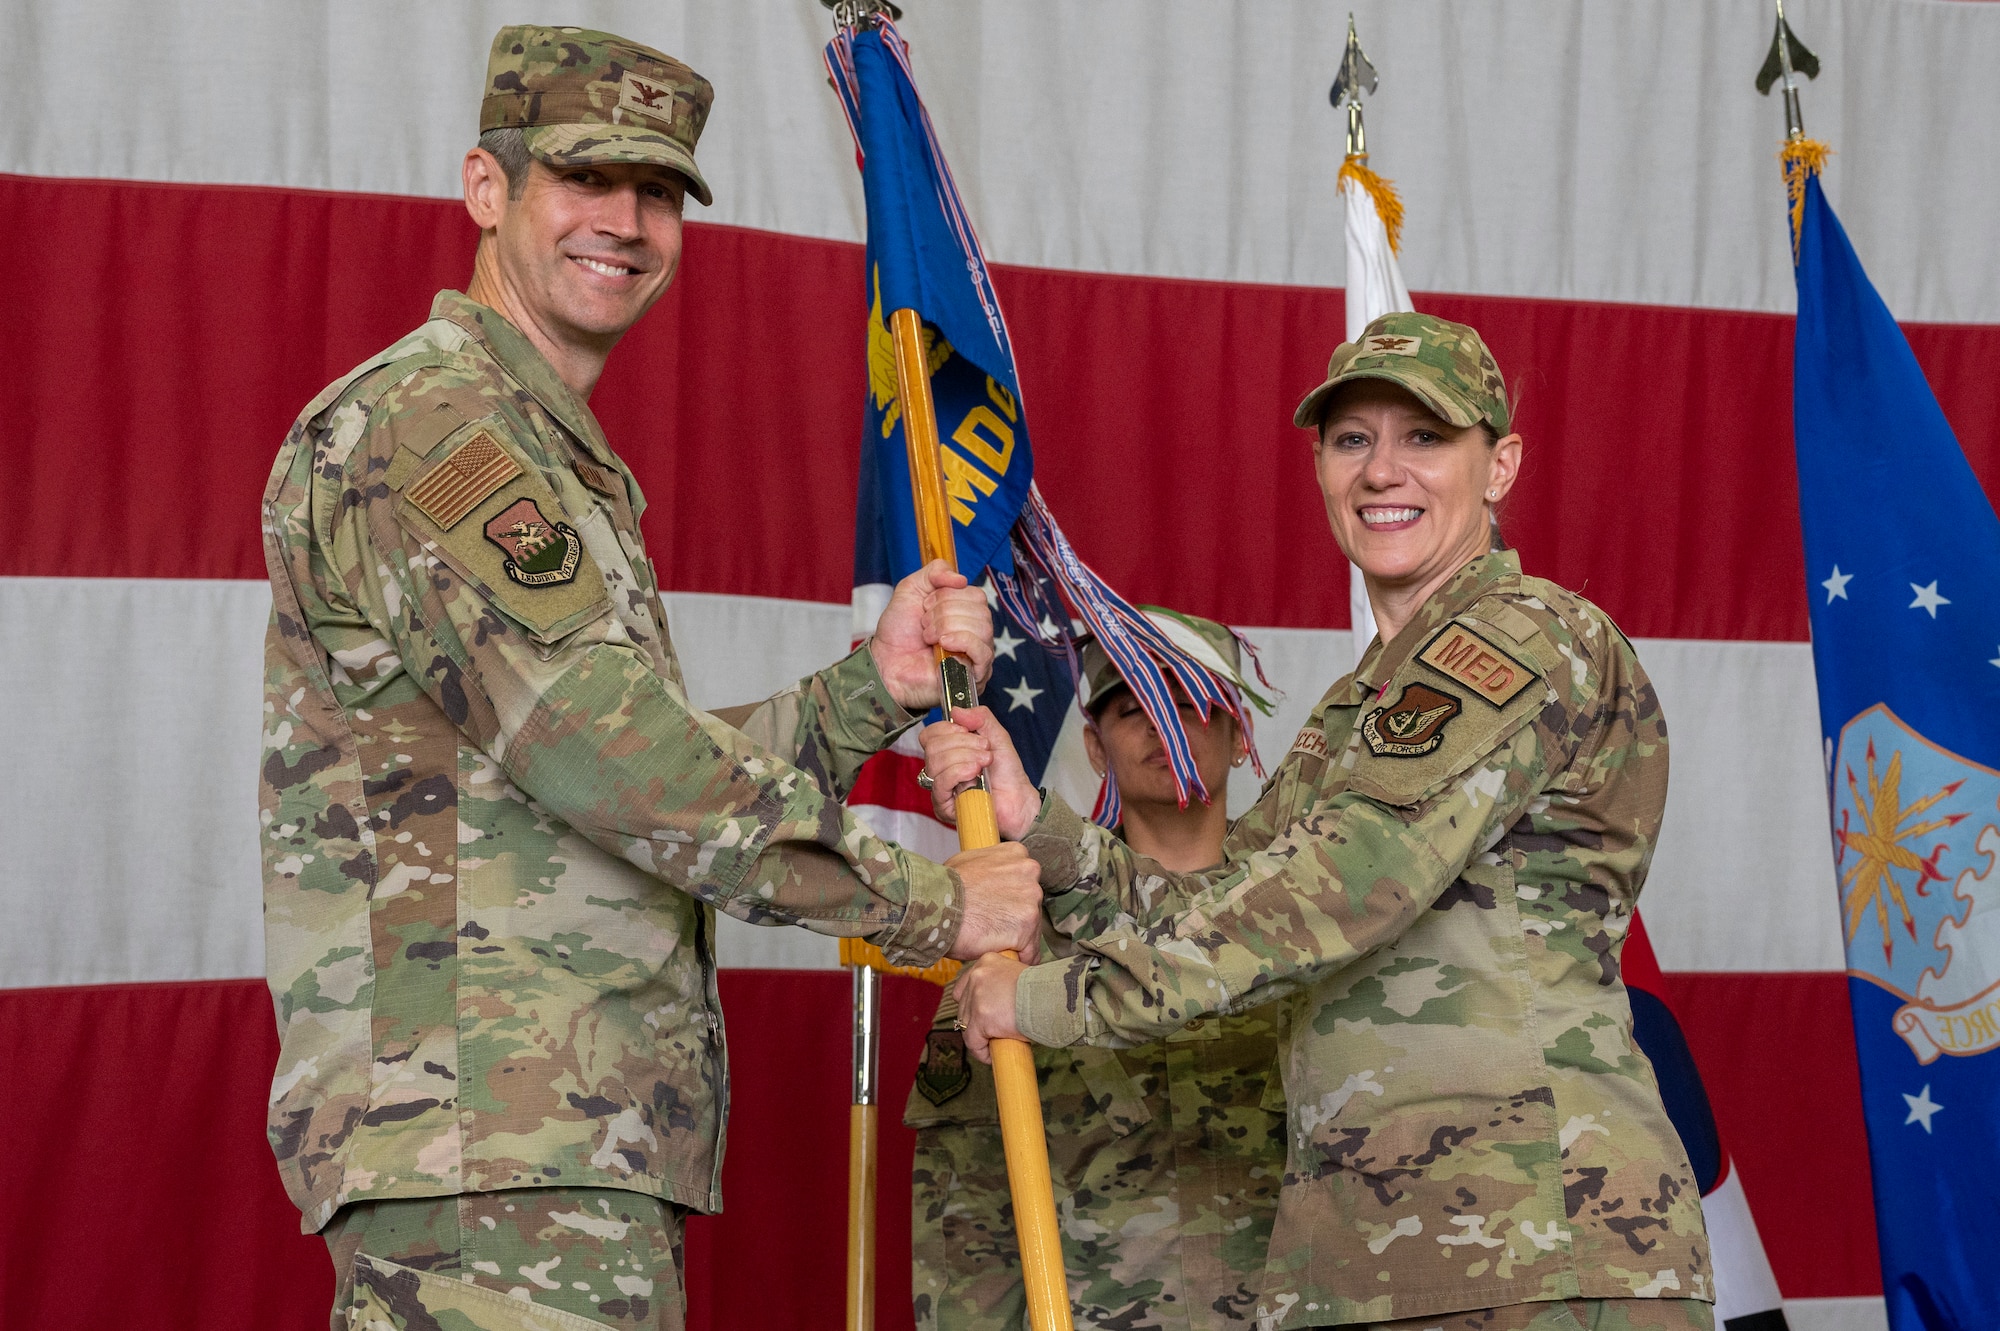 U.S. Air Force Col. William McKibban, left, 51st Fighter Wing commander, receives the guidon from Col. Jennifer Vecchione, 51st Medical Group outgoing commander, at Osan Air Base, Republic of Korea, July 12, 2023. In a change of command ceremony, the guidon symbolizes the transfer of command, the authority and responsibility associated with it.  (U.S. Air Force photo by Senior Airman Aaron Edwards)